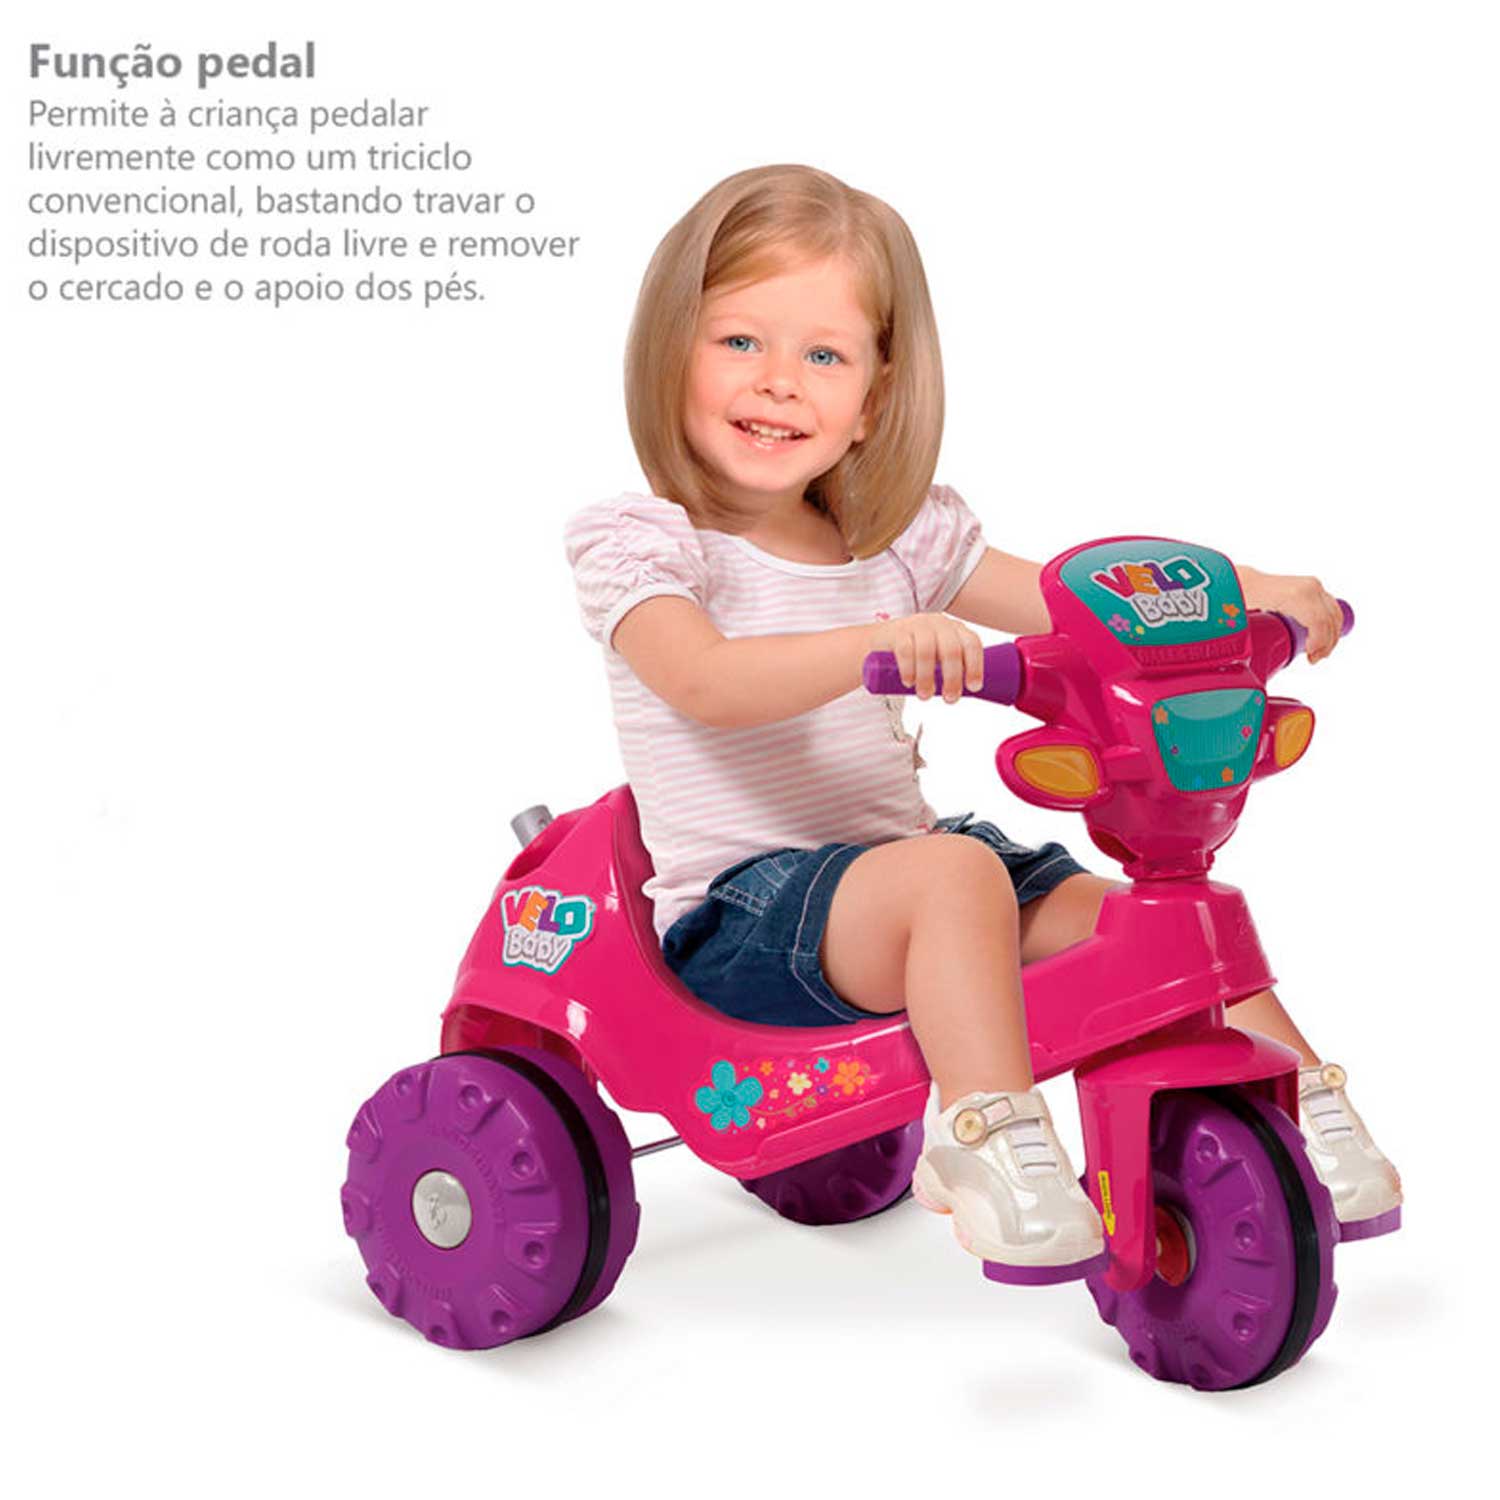 TRICICLO VELOBABY A PEDAL 1A+ BANDEIRANTE REF:207